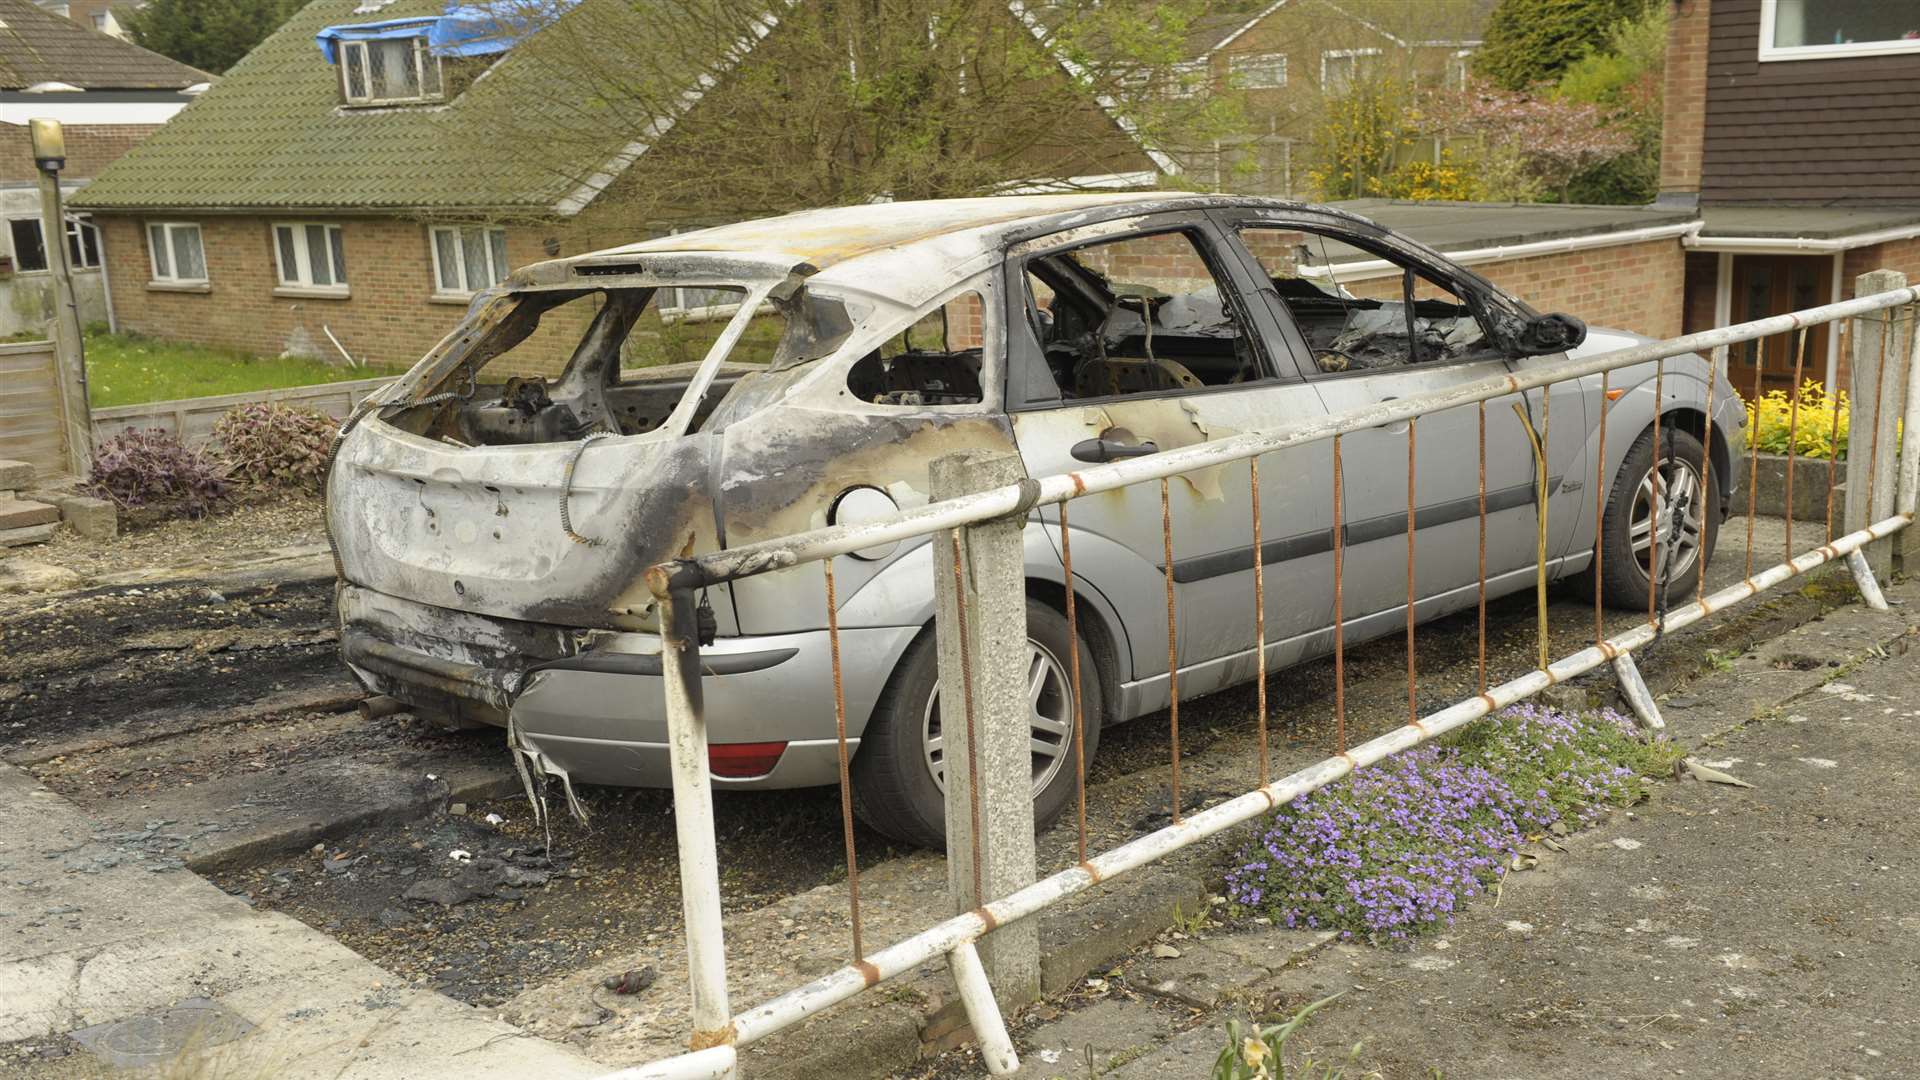 Firefighters were called to a car fire in Boxley Road, Walderslade on Wednesday.